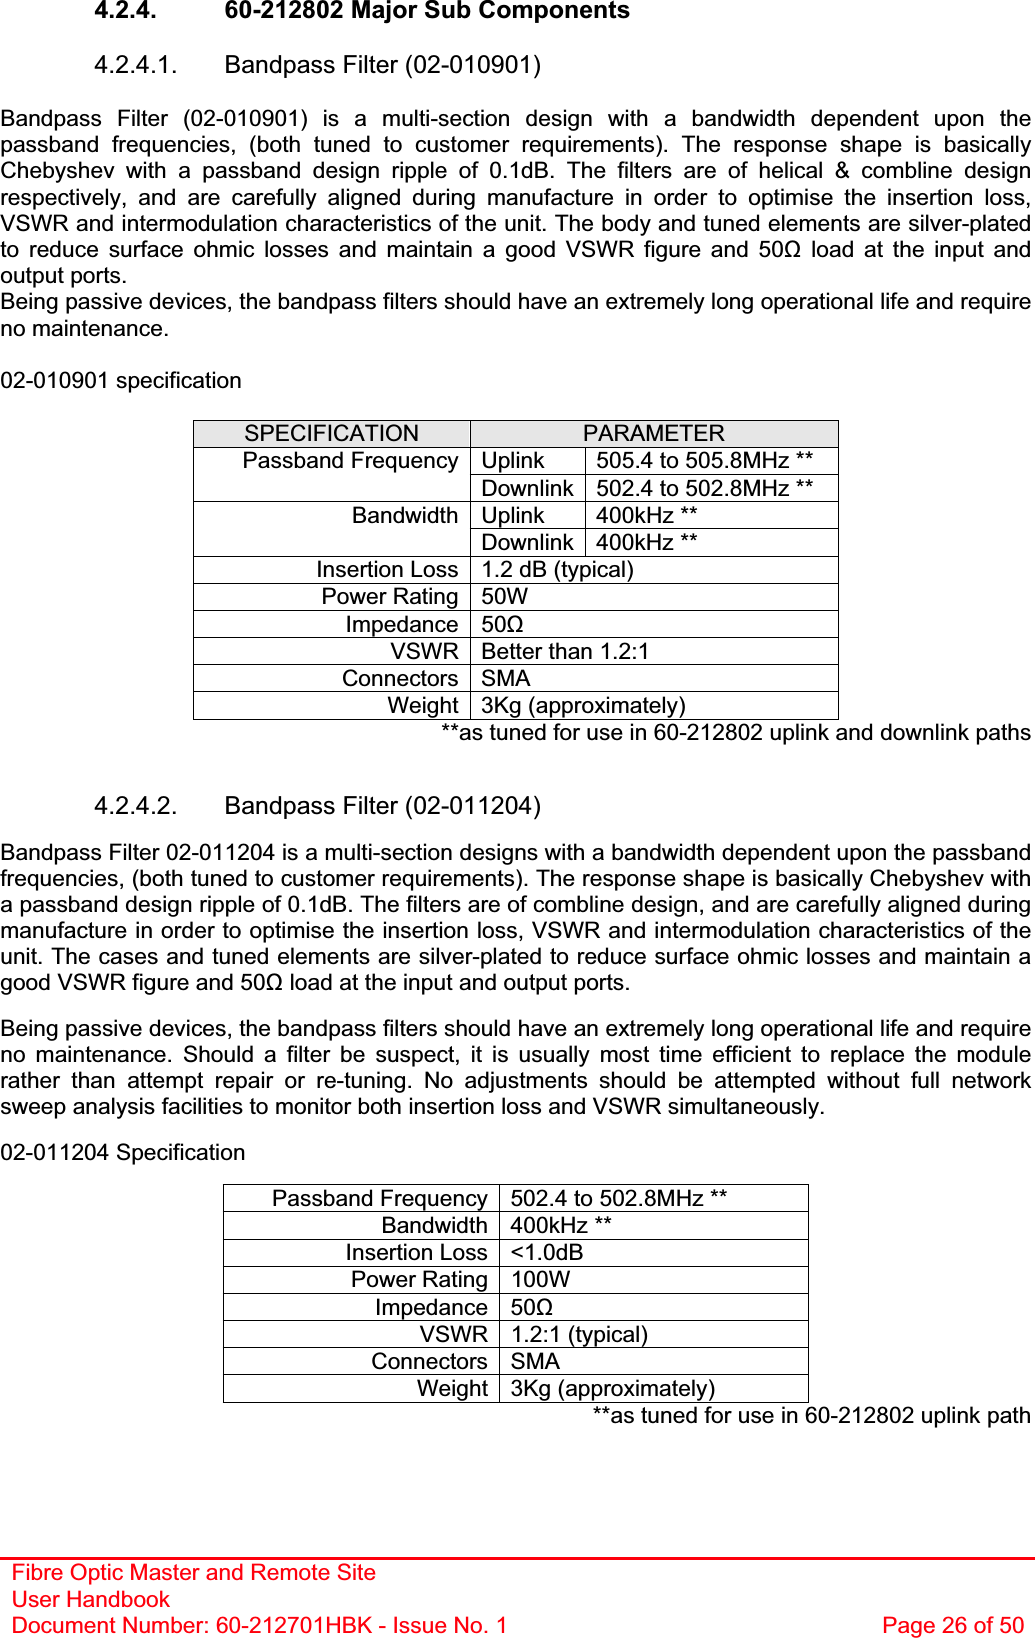 Fibre Optic Master and Remote Site User Handbook Document Number: 60-212701HBK - Issue No. 1  Page 26 of 504.2.4.  60-212802 Major Sub Components 4.2.4.1.  Bandpass Filter (02-010901)Bandpass Filter (02-010901) is a multi-section design with a bandwidth dependent upon the passband frequencies, (both tuned to customer requirements). The response shape is basically Chebyshev with a passband design ripple of 0.1dB. The filters are of helical &amp; combline design respectively, and are carefully aligned during manufacture in order to optimise the insertion loss, VSWR and intermodulation characteristics of the unit. The body and tuned elements are silver-plated to reduce surface ohmic losses and maintain a good VSWR figure and 50ȍ load at the input and output ports. Being passive devices, the bandpass filters should have an extremely long operational life and require no maintenance. 02-010901 specification SPECIFICATION PARAMETERUplink  505.4 to 505.8MHz ** Passband FrequencyDownlink 502.4 to 502.8MHz ** Uplink 400kHz ** BandwidthDownlink 400kHz ** Insertion Loss 1.2 dB (typical) Power Rating 50W Impedance 50ȍVSWR Better than 1.2:1 Connectors SMA Weight 3Kg (approximately) **as tuned for use in 60-212802 uplink and downlink paths 4.2.4.2. Bandpass Filter (02-011204) Bandpass Filter 02-011204 is a multi-section designs with a bandwidth dependent upon the passband frequencies, (both tuned to customer requirements). The response shape is basically Chebyshev with a passband design ripple of 0.1dB. The filters are of combline design, and are carefully aligned during manufacture in order to optimise the insertion loss, VSWR and intermodulation characteristics of the unit. The cases and tuned elements are silver-plated to reduce surface ohmic losses and maintain a good VSWR figure and 50ȍ load at the input and output ports.Being passive devices, the bandpass filters should have an extremely long operational life and require no maintenance. Should a filter be suspect, it is usually most time efficient to replace the module rather than attempt repair or re-tuning. No adjustments should be attempted without full network sweep analysis facilities to monitor both insertion loss and VSWR simultaneously. 02-011204 Specification Passband Frequency 502.4 to 502.8MHz ** Bandwidth 400kHz ** Insertion Loss &lt;1.0dB Power Rating 100W Impedance 50ȍVSWR 1.2:1 (typical) Connectors SMA Weight 3Kg (approximately) **as tuned for use in 60-212802 uplink path 